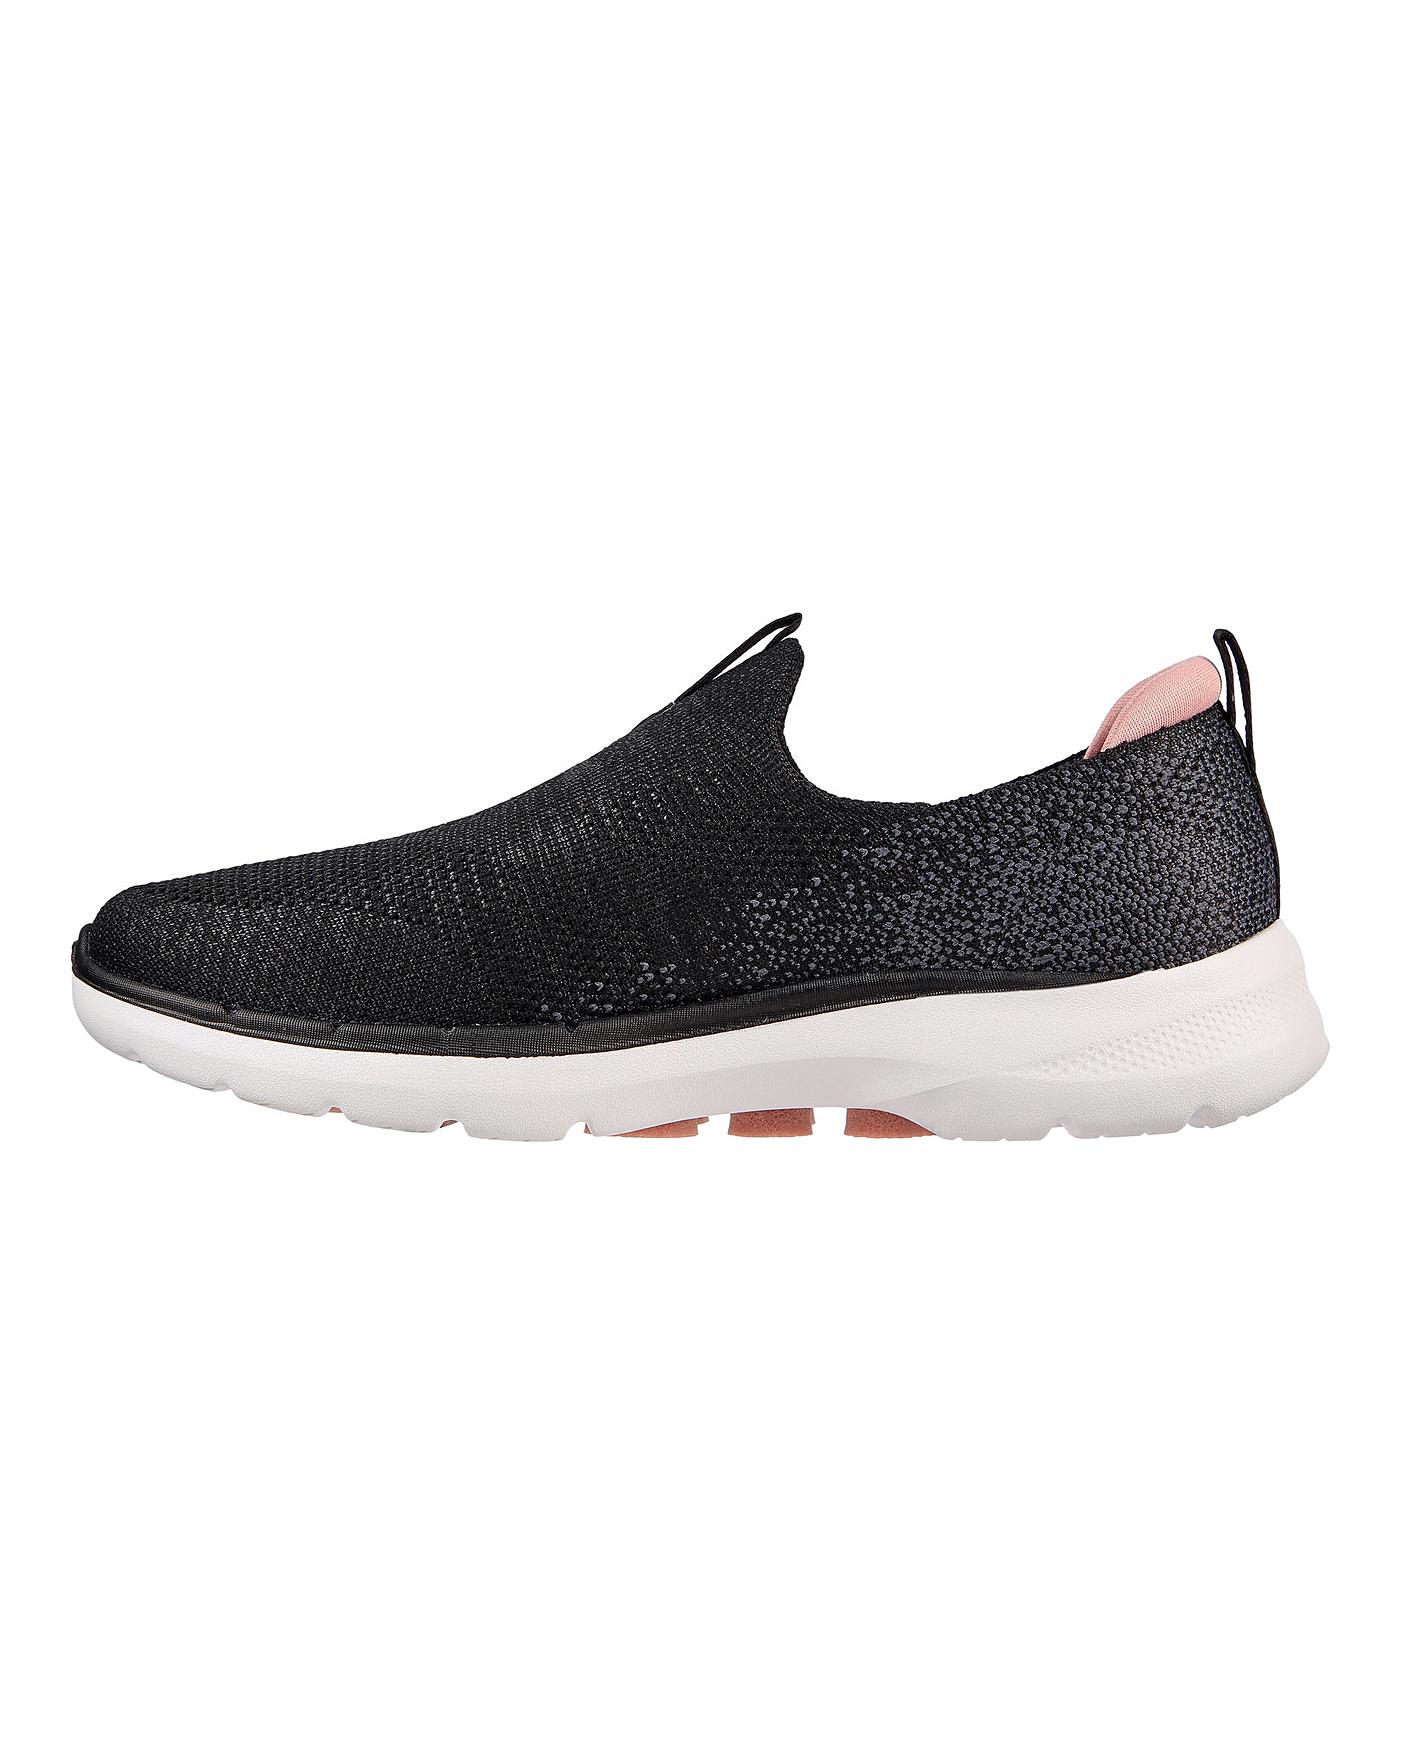 Skechers Go Walk 6 Glimmering Trainers | Simply Be